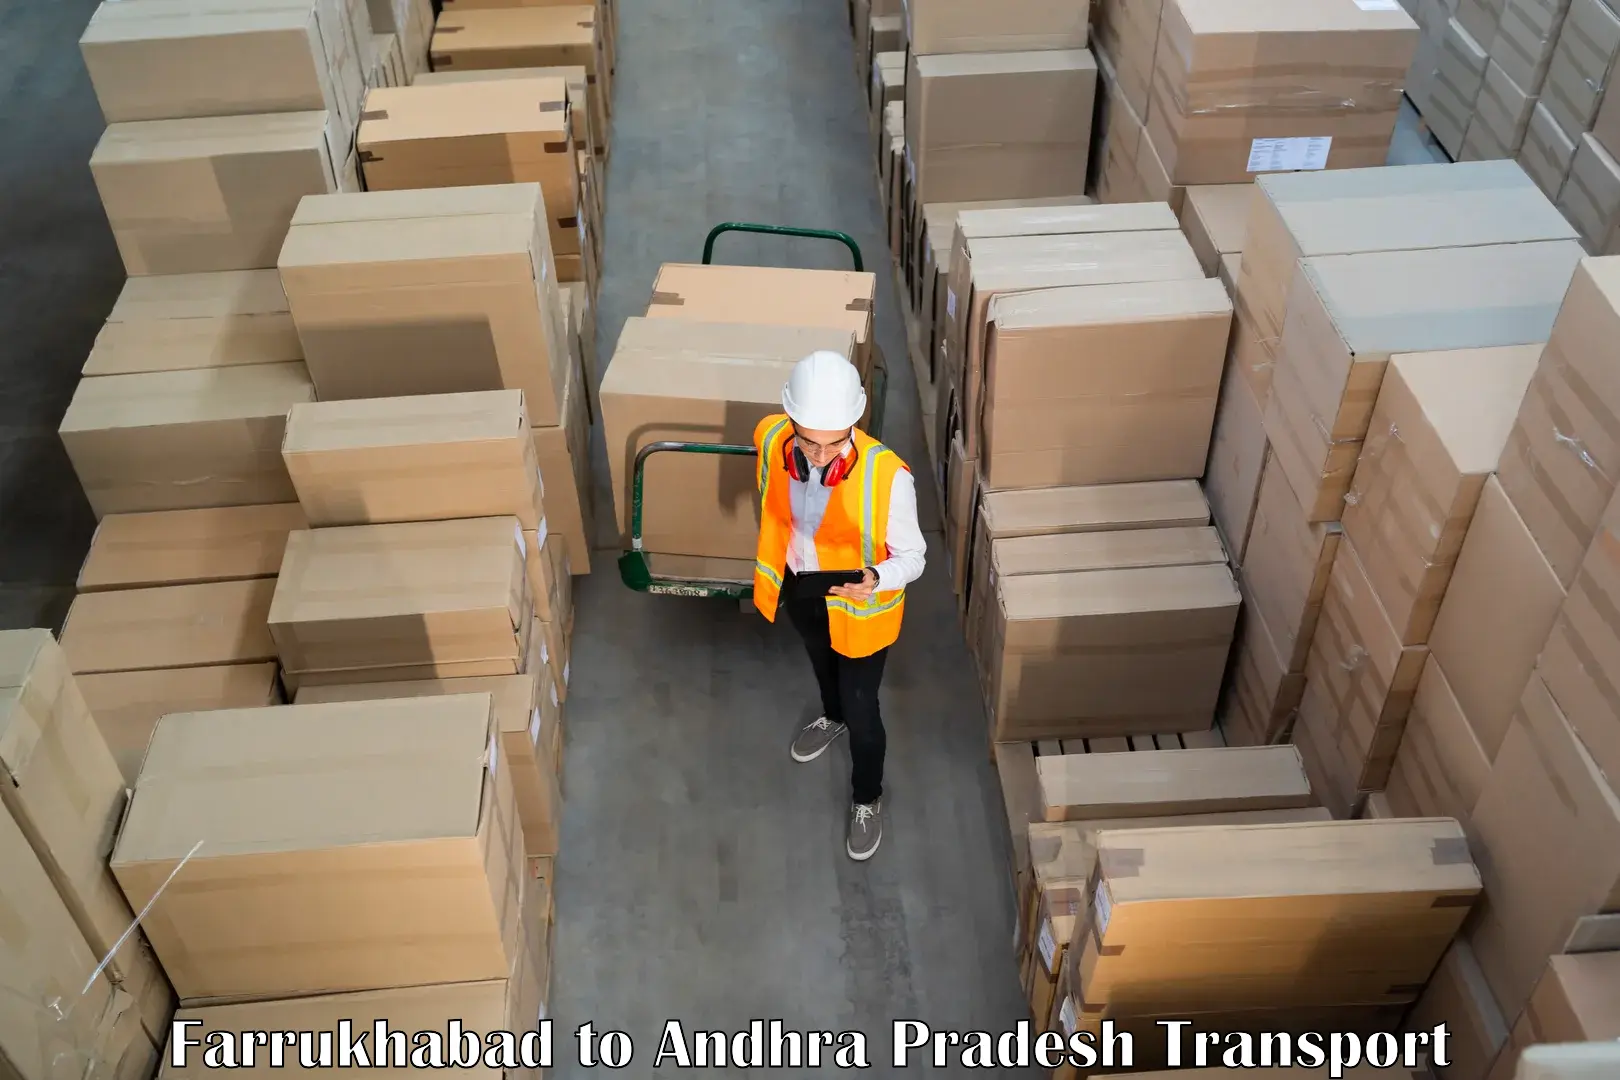 Truck transport companies in India Farrukhabad to Atchempet